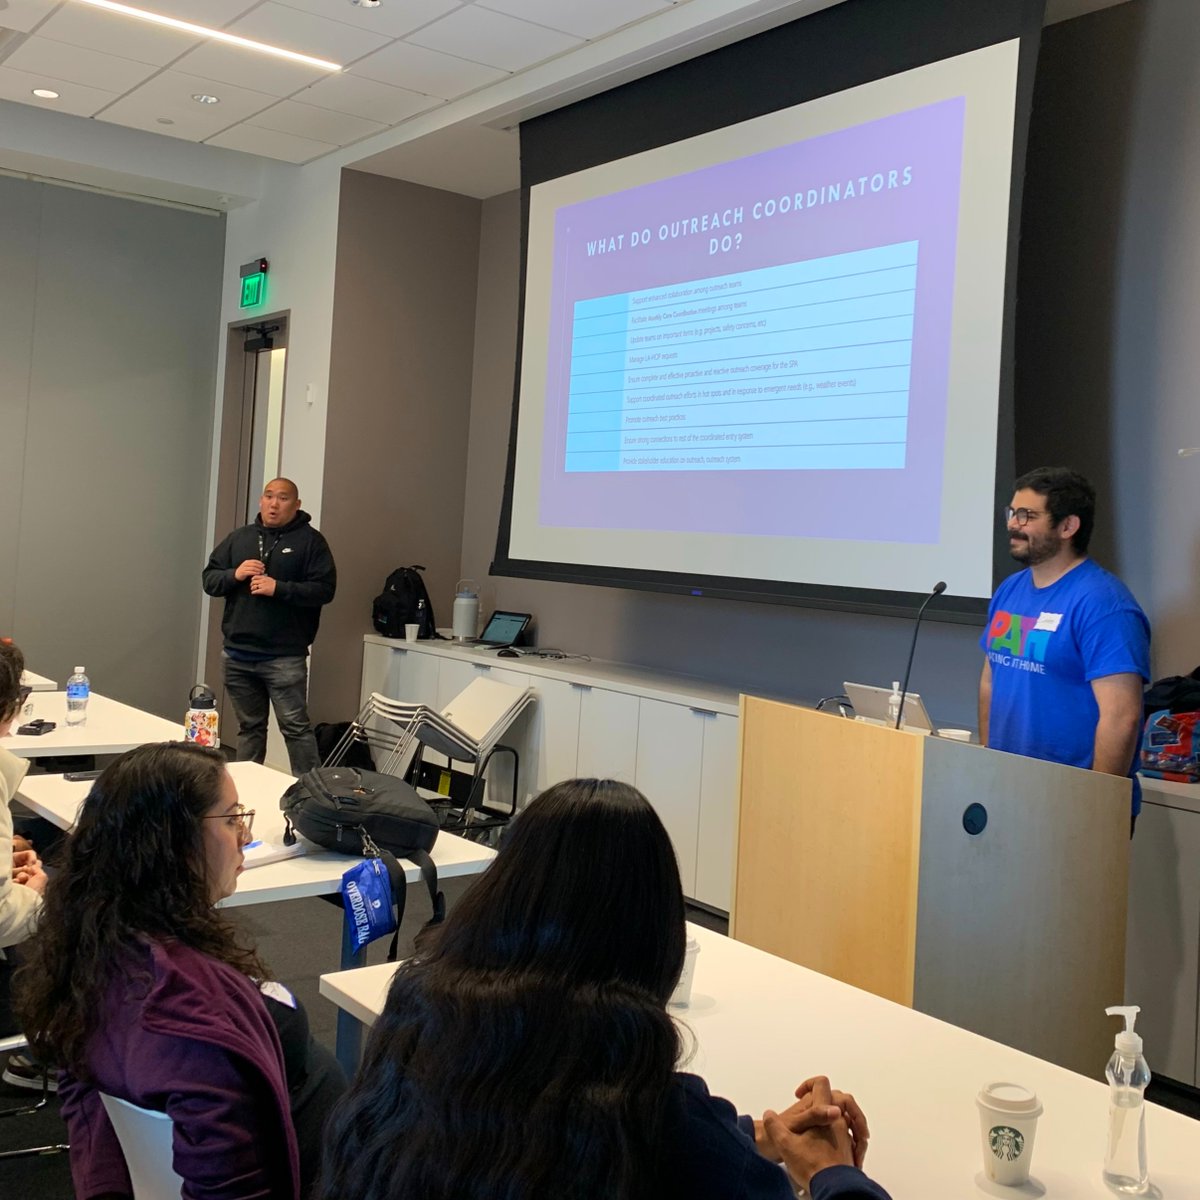 Our outreach teams had a fantastic time presenting alongside @LAHomeless and other community providers at the annual Outreach Bootcamp Training in Los Angeles! We were thankful for a productive time spent collaborating with other providers on best practices and strategies.